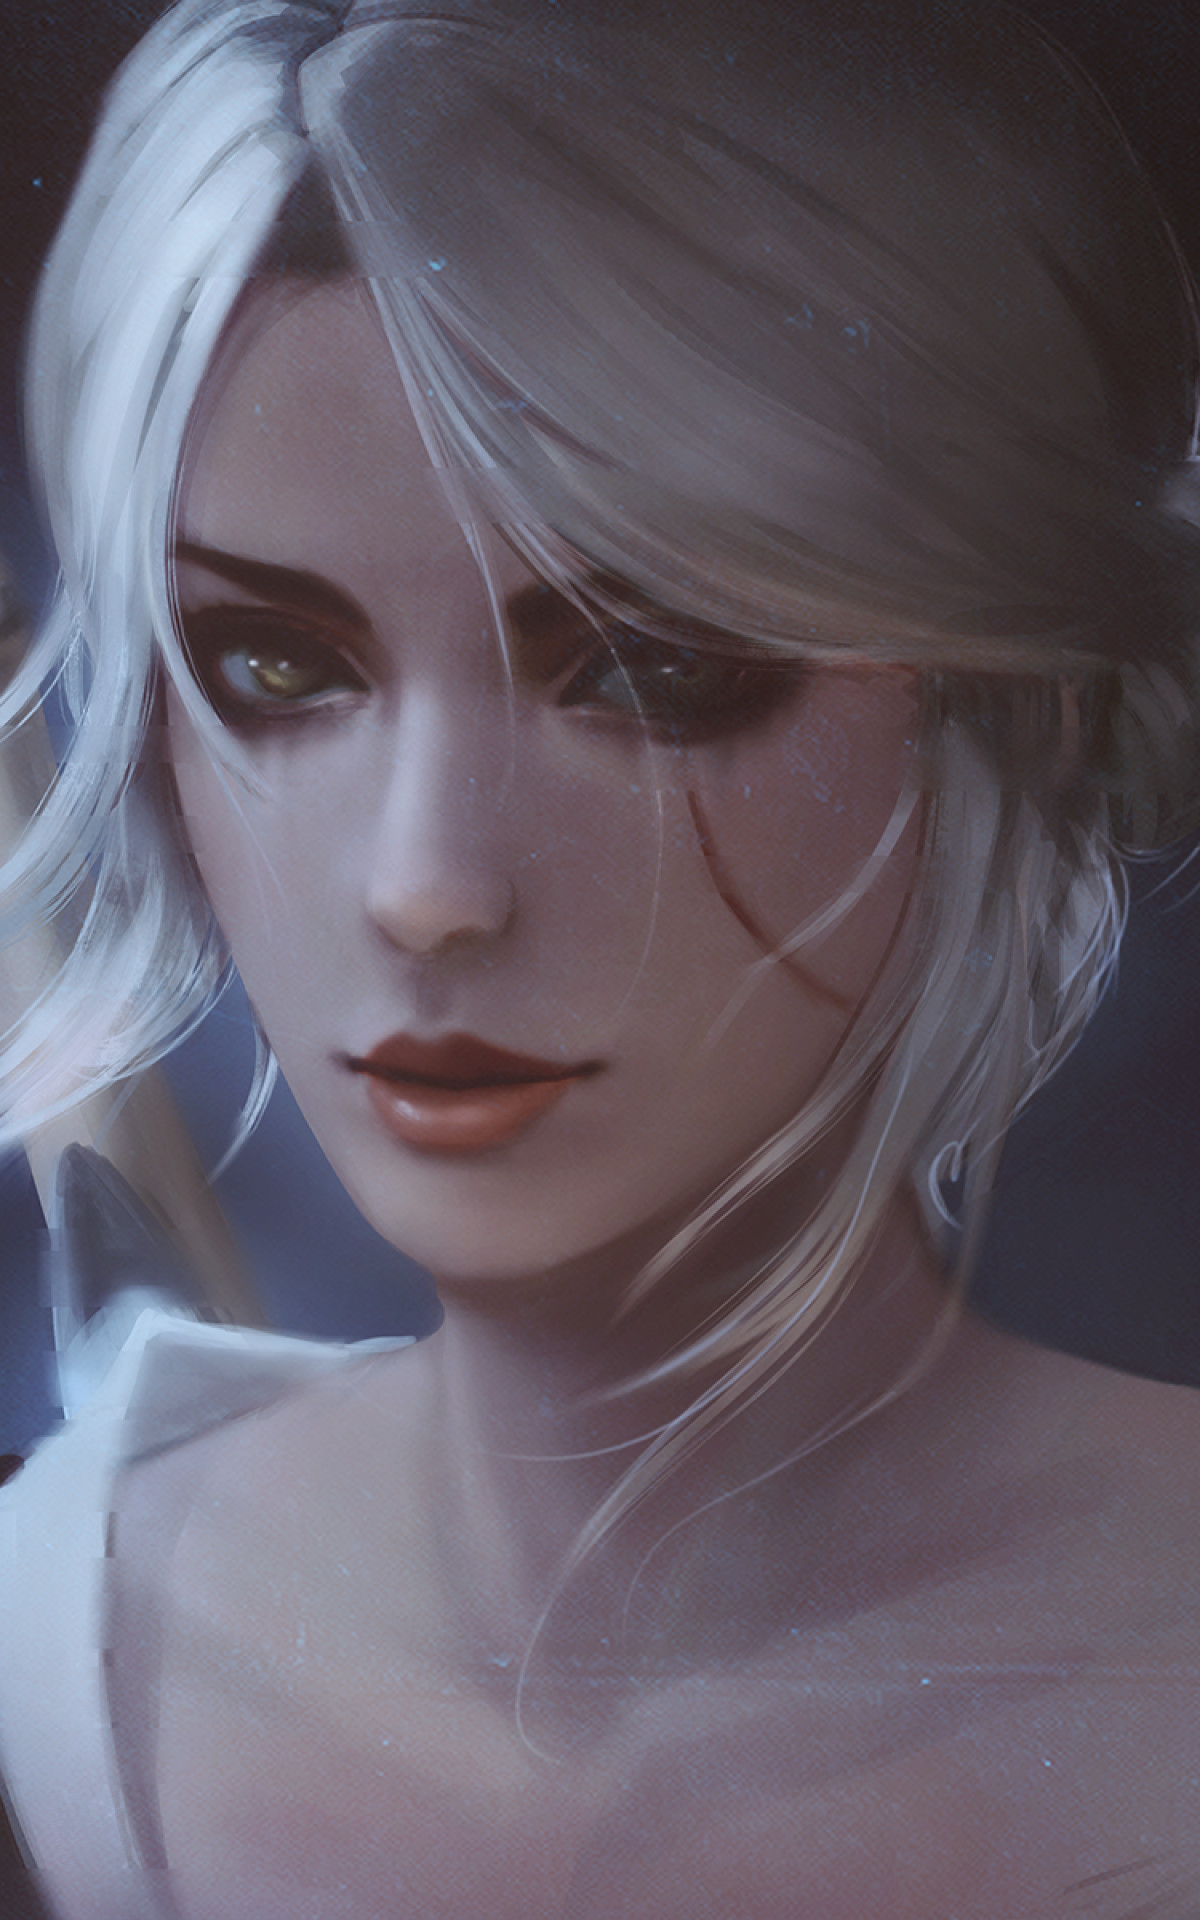 1200x1920 ... Portrait Wallpapers. The Witcher 3:wild Hunter, Cirilla Fiona, Scar,  Silver Hair, Face